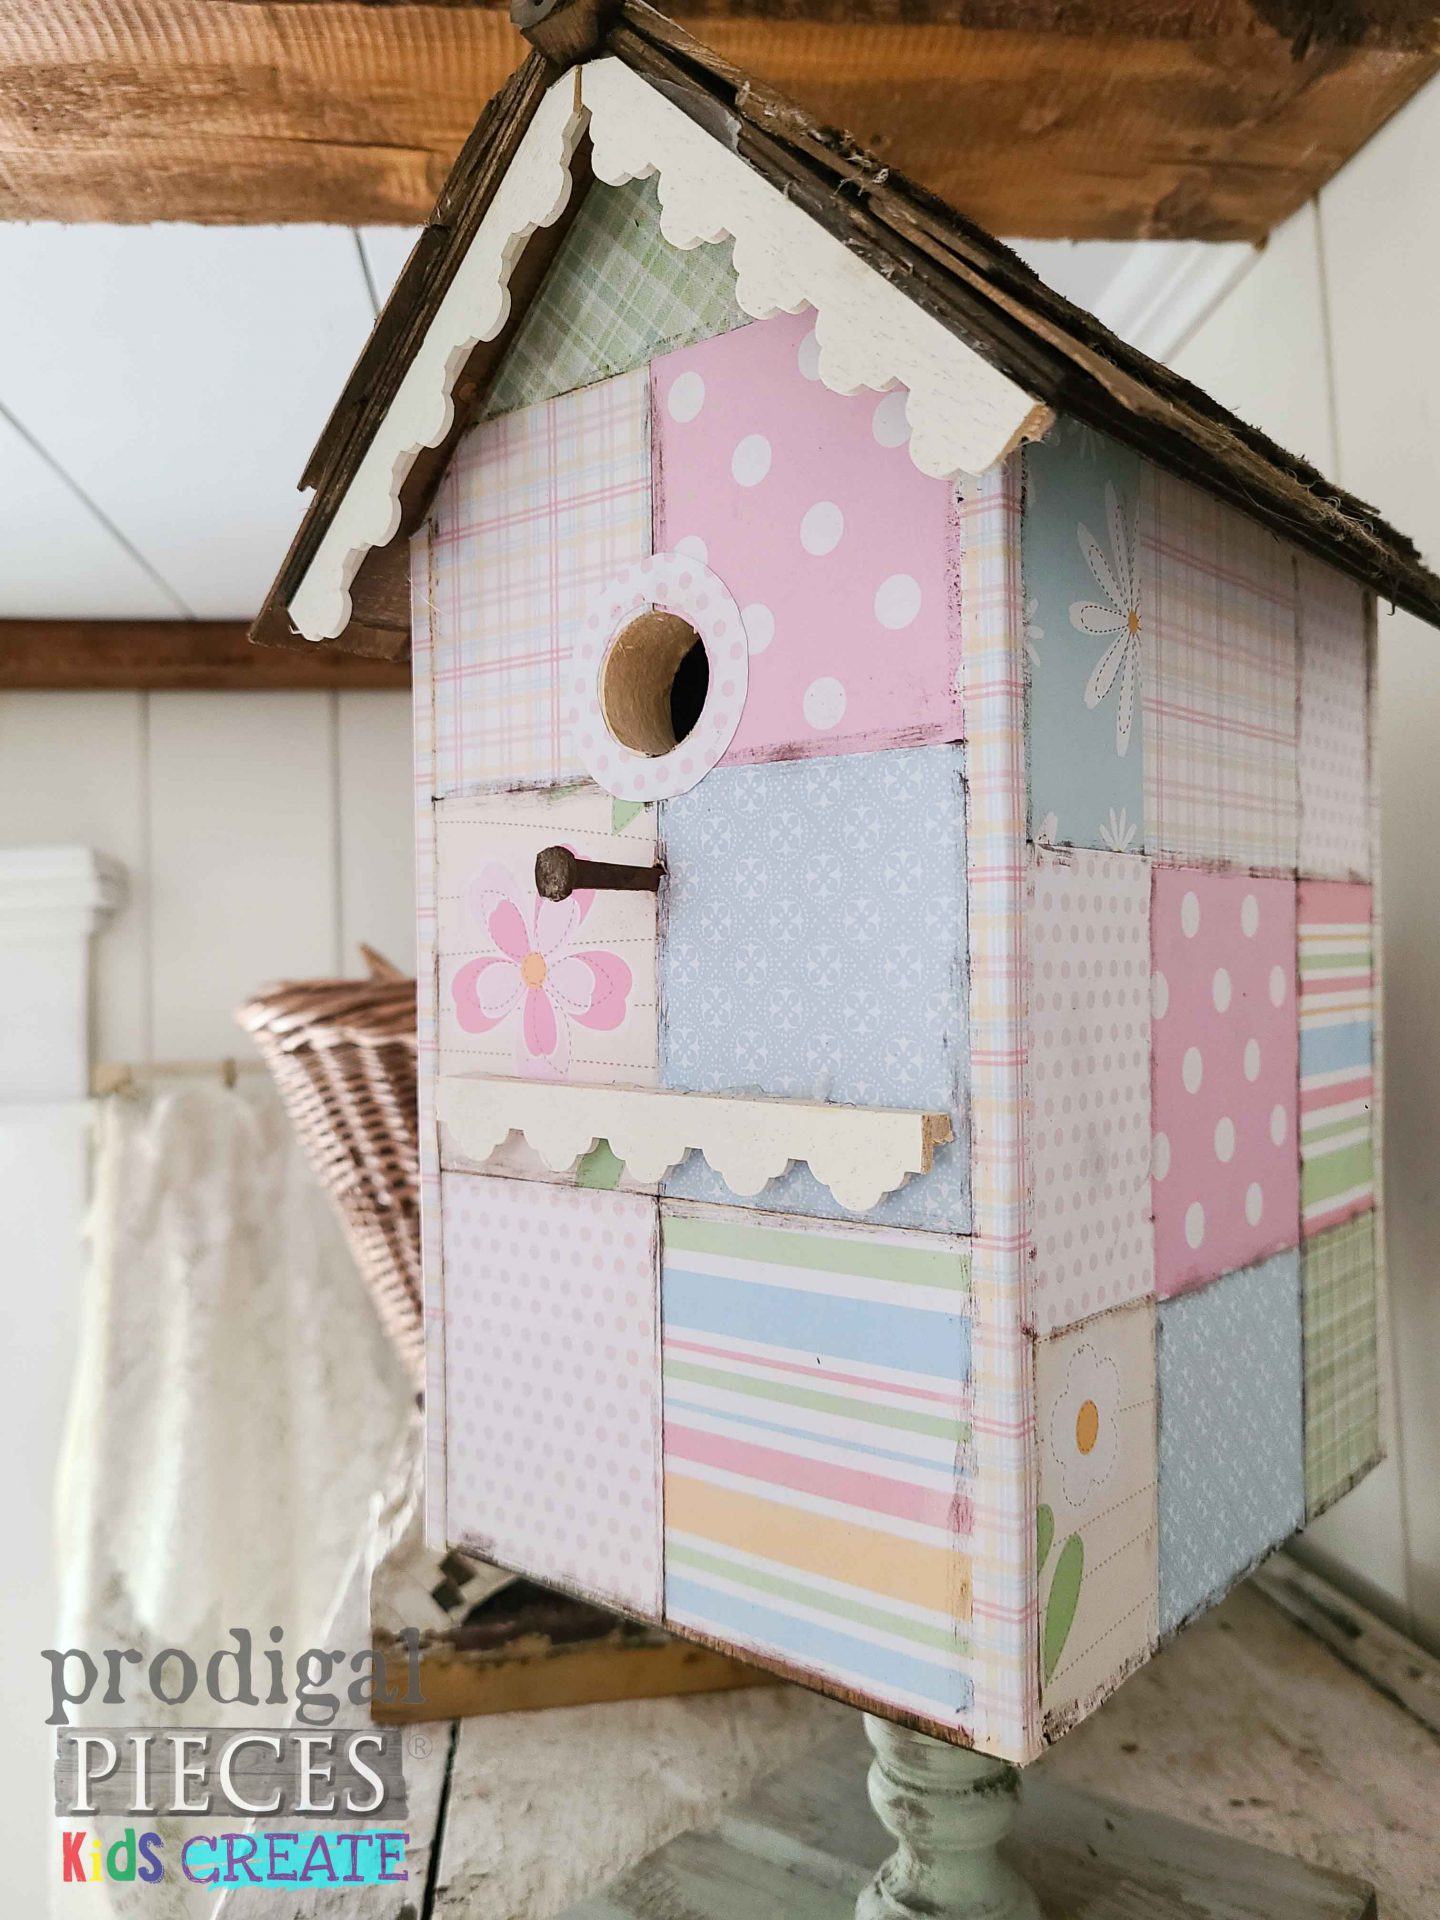 Quilted Birdhouse with Decoupage Scrapbook Paper for KIDS Create by Prodigal Pieces | prodigalpieces.com #prodigalpieces #quilt #diy #kids #spring